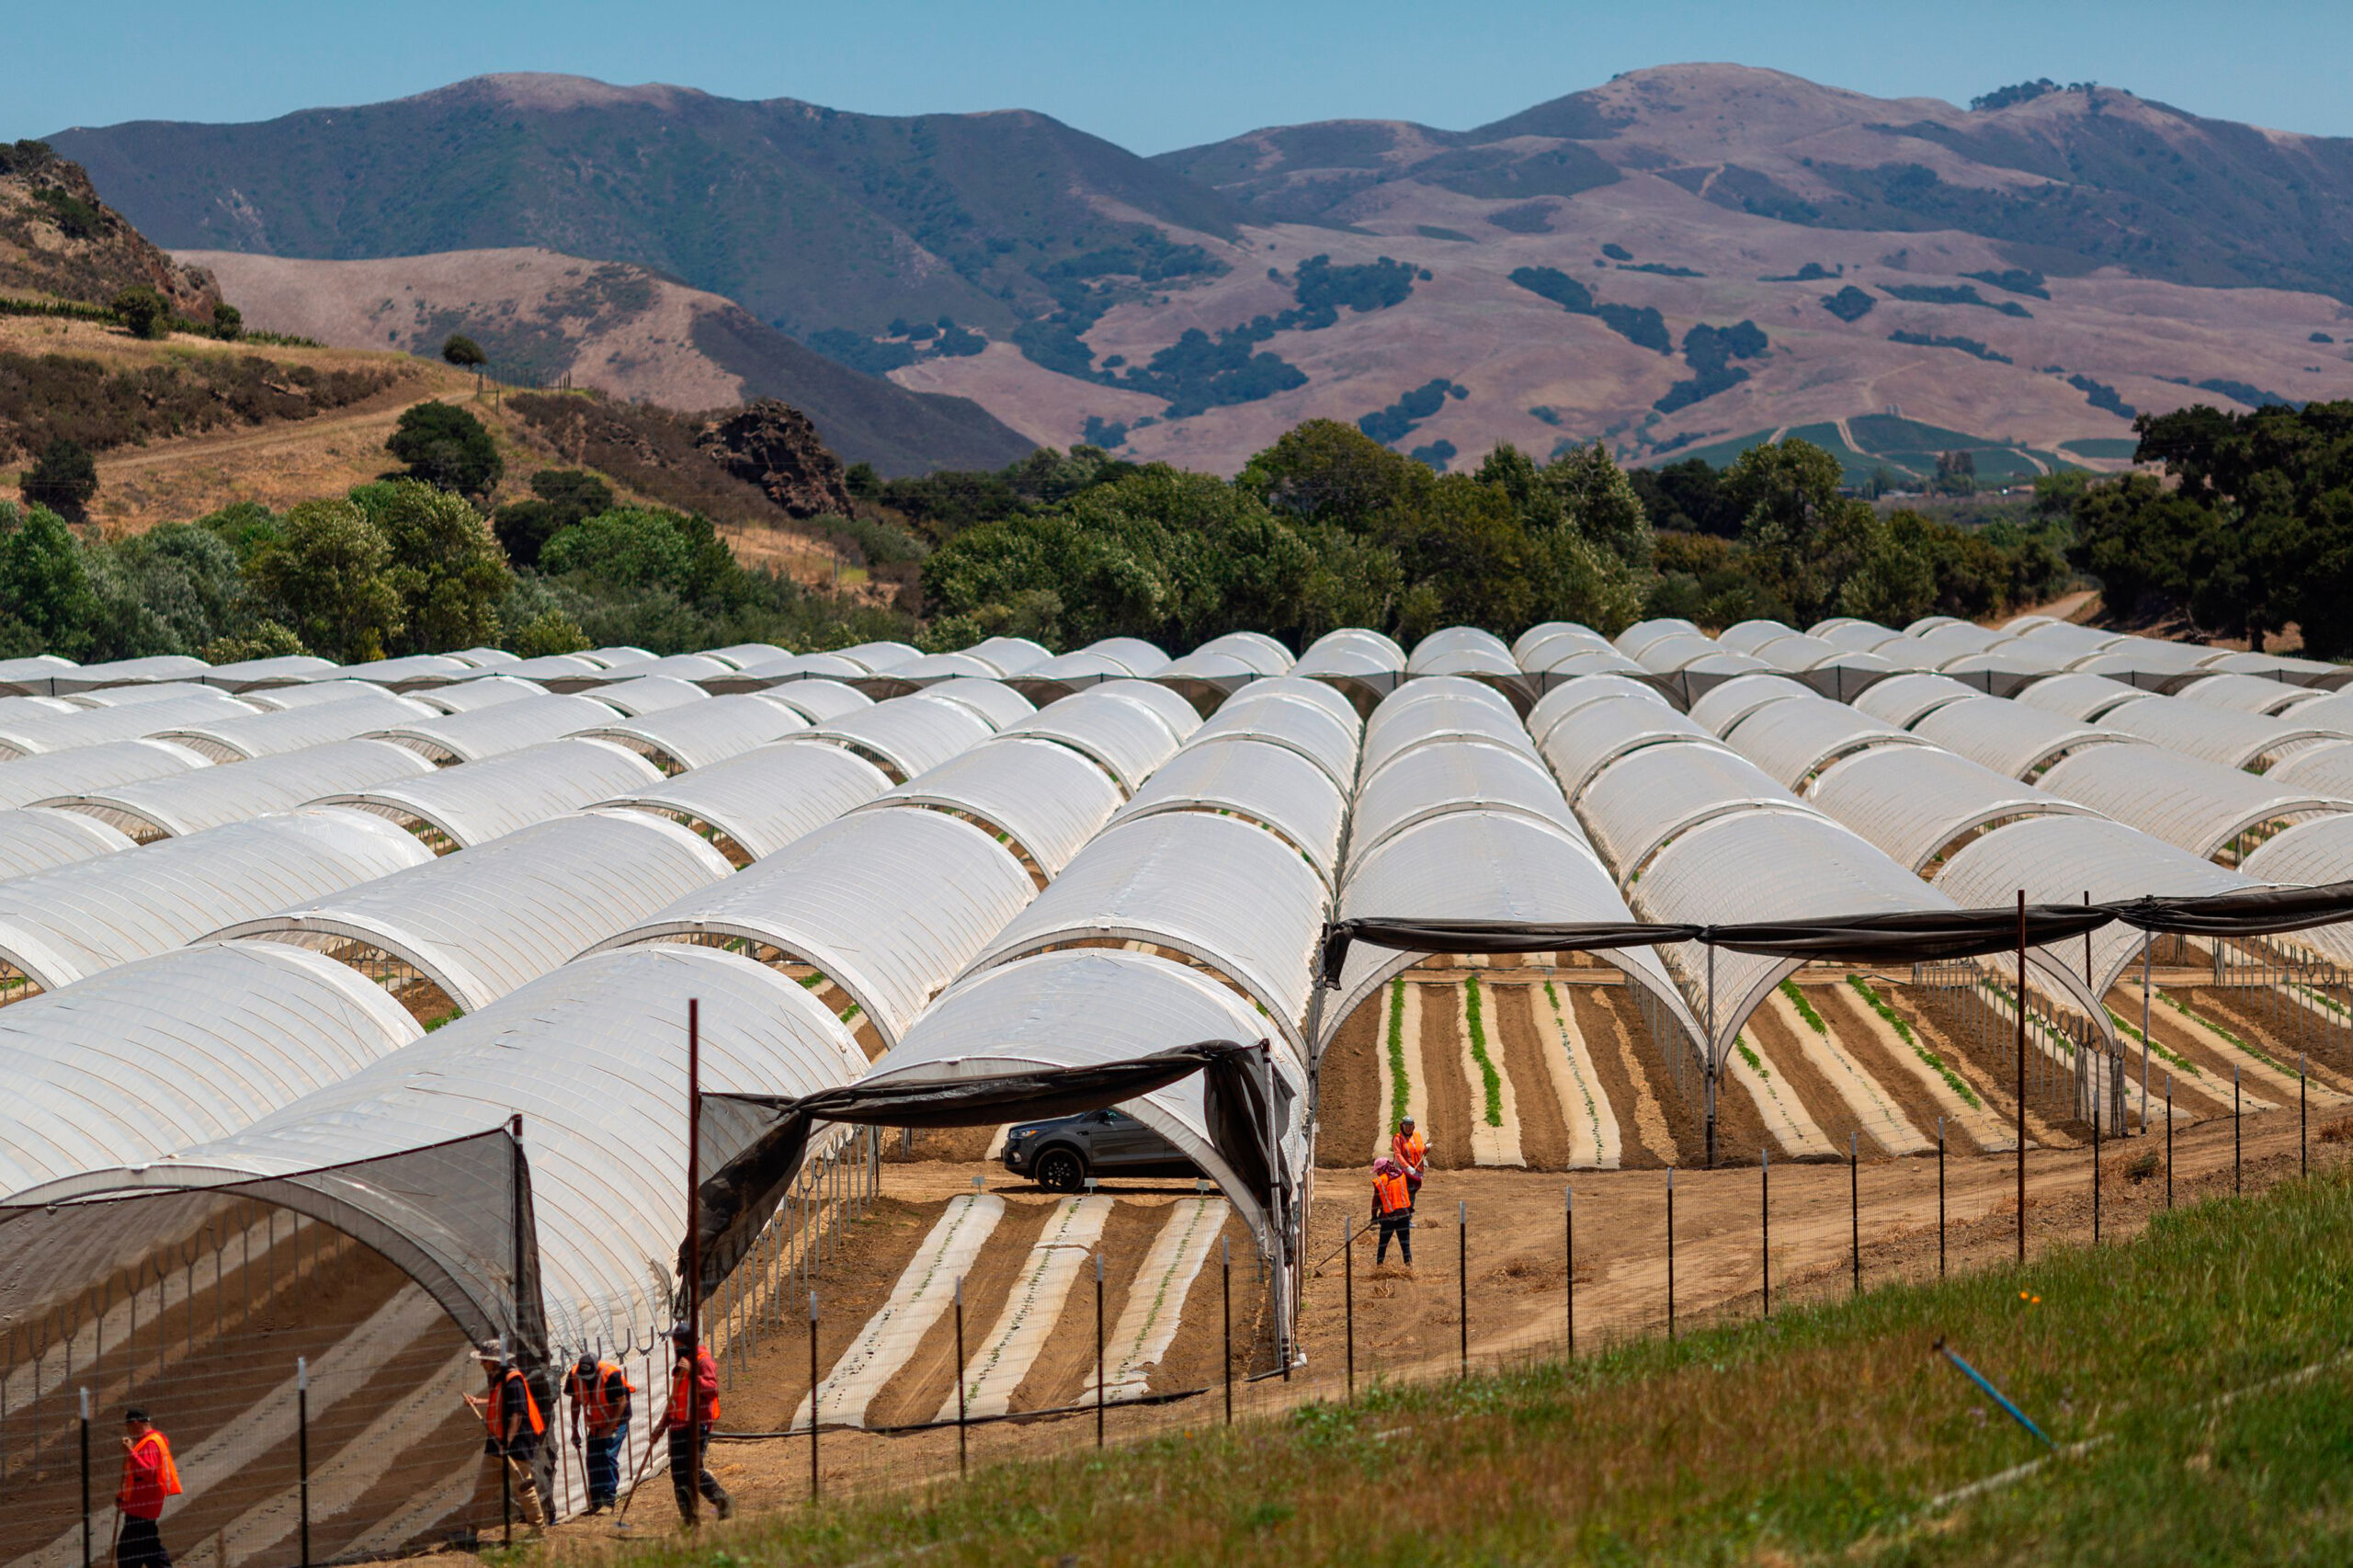 A cannabis growing operation is seen in the Santa Ynez Valley northwest of Santa Barbara, Calif., on Aug. 6, 2019.